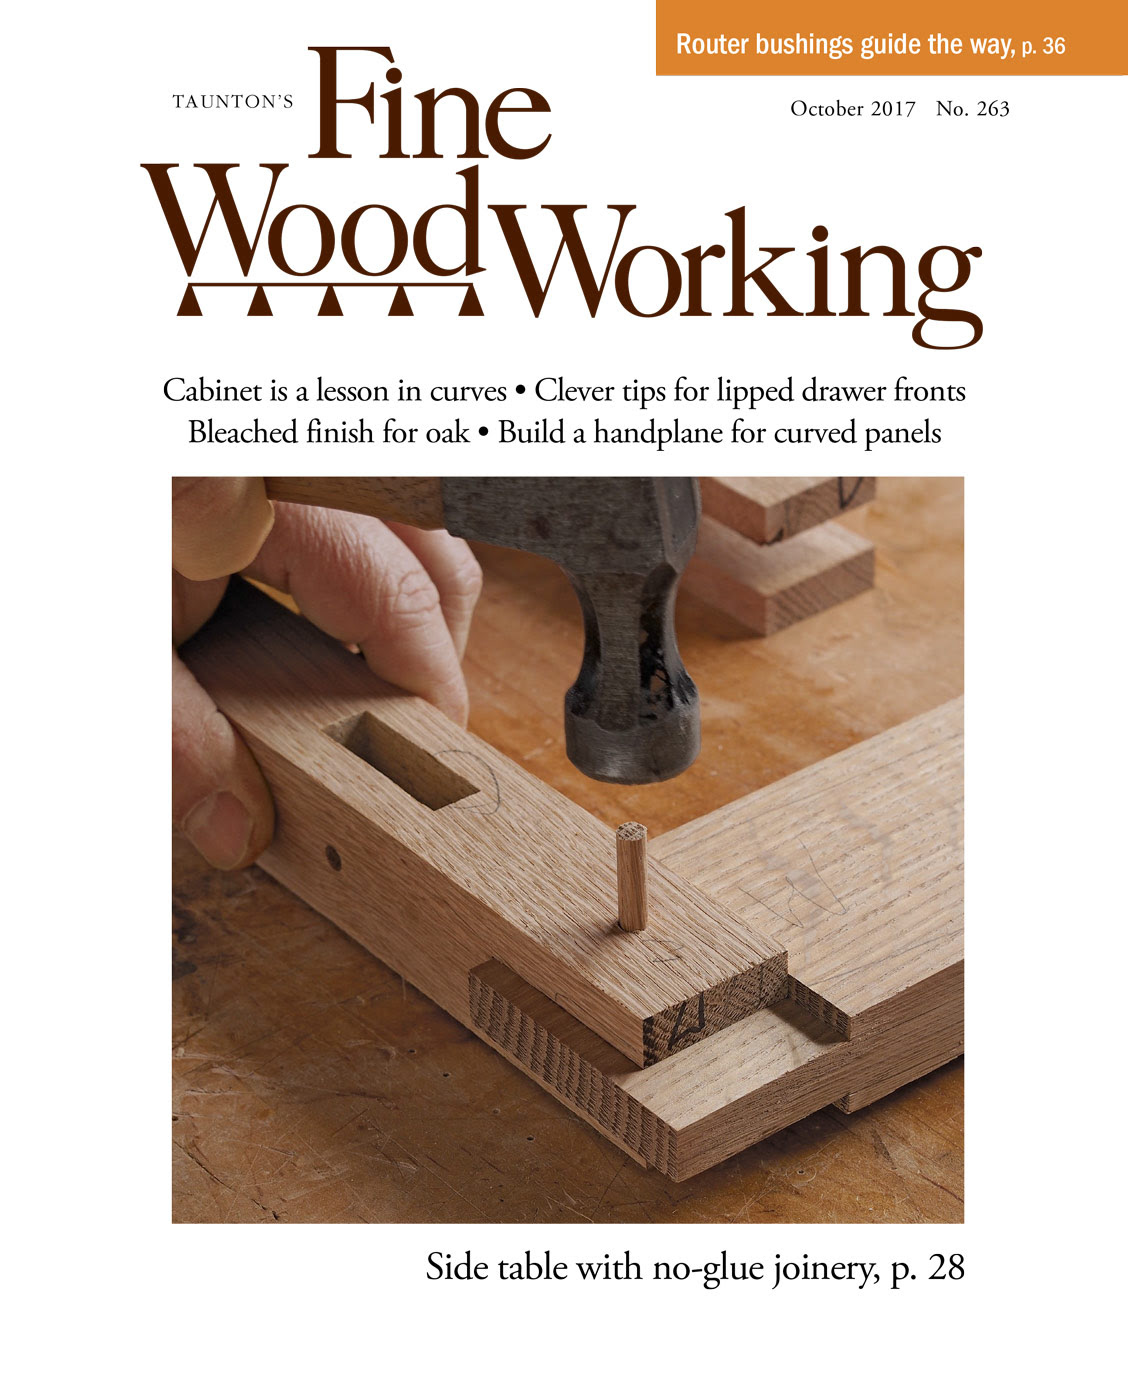 FineWoodworking - Expert advice on woodworking and ...